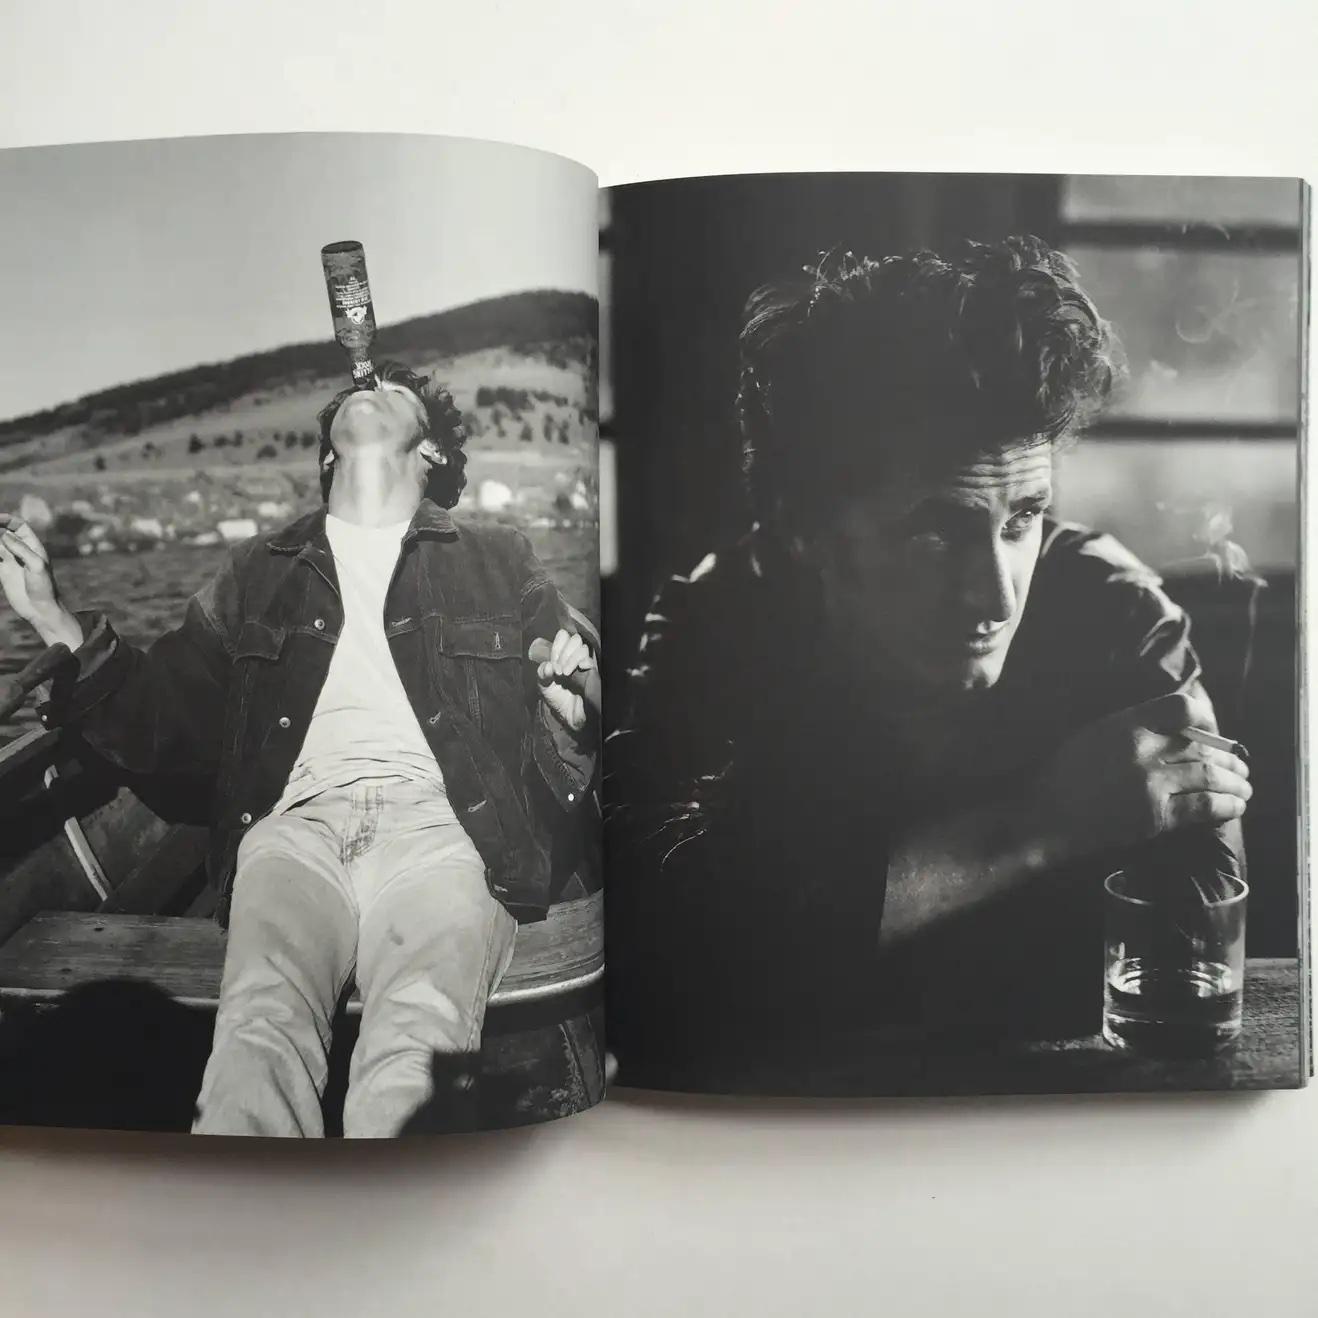 First edition, published by Bulfinch Press / Little Brown & Company, Boston, 1997. 

Published to coincide with the exhibition of Bruce Weber's work at the National Portrait Gallery, London, this assemblage of Weber’s photographic images forms a